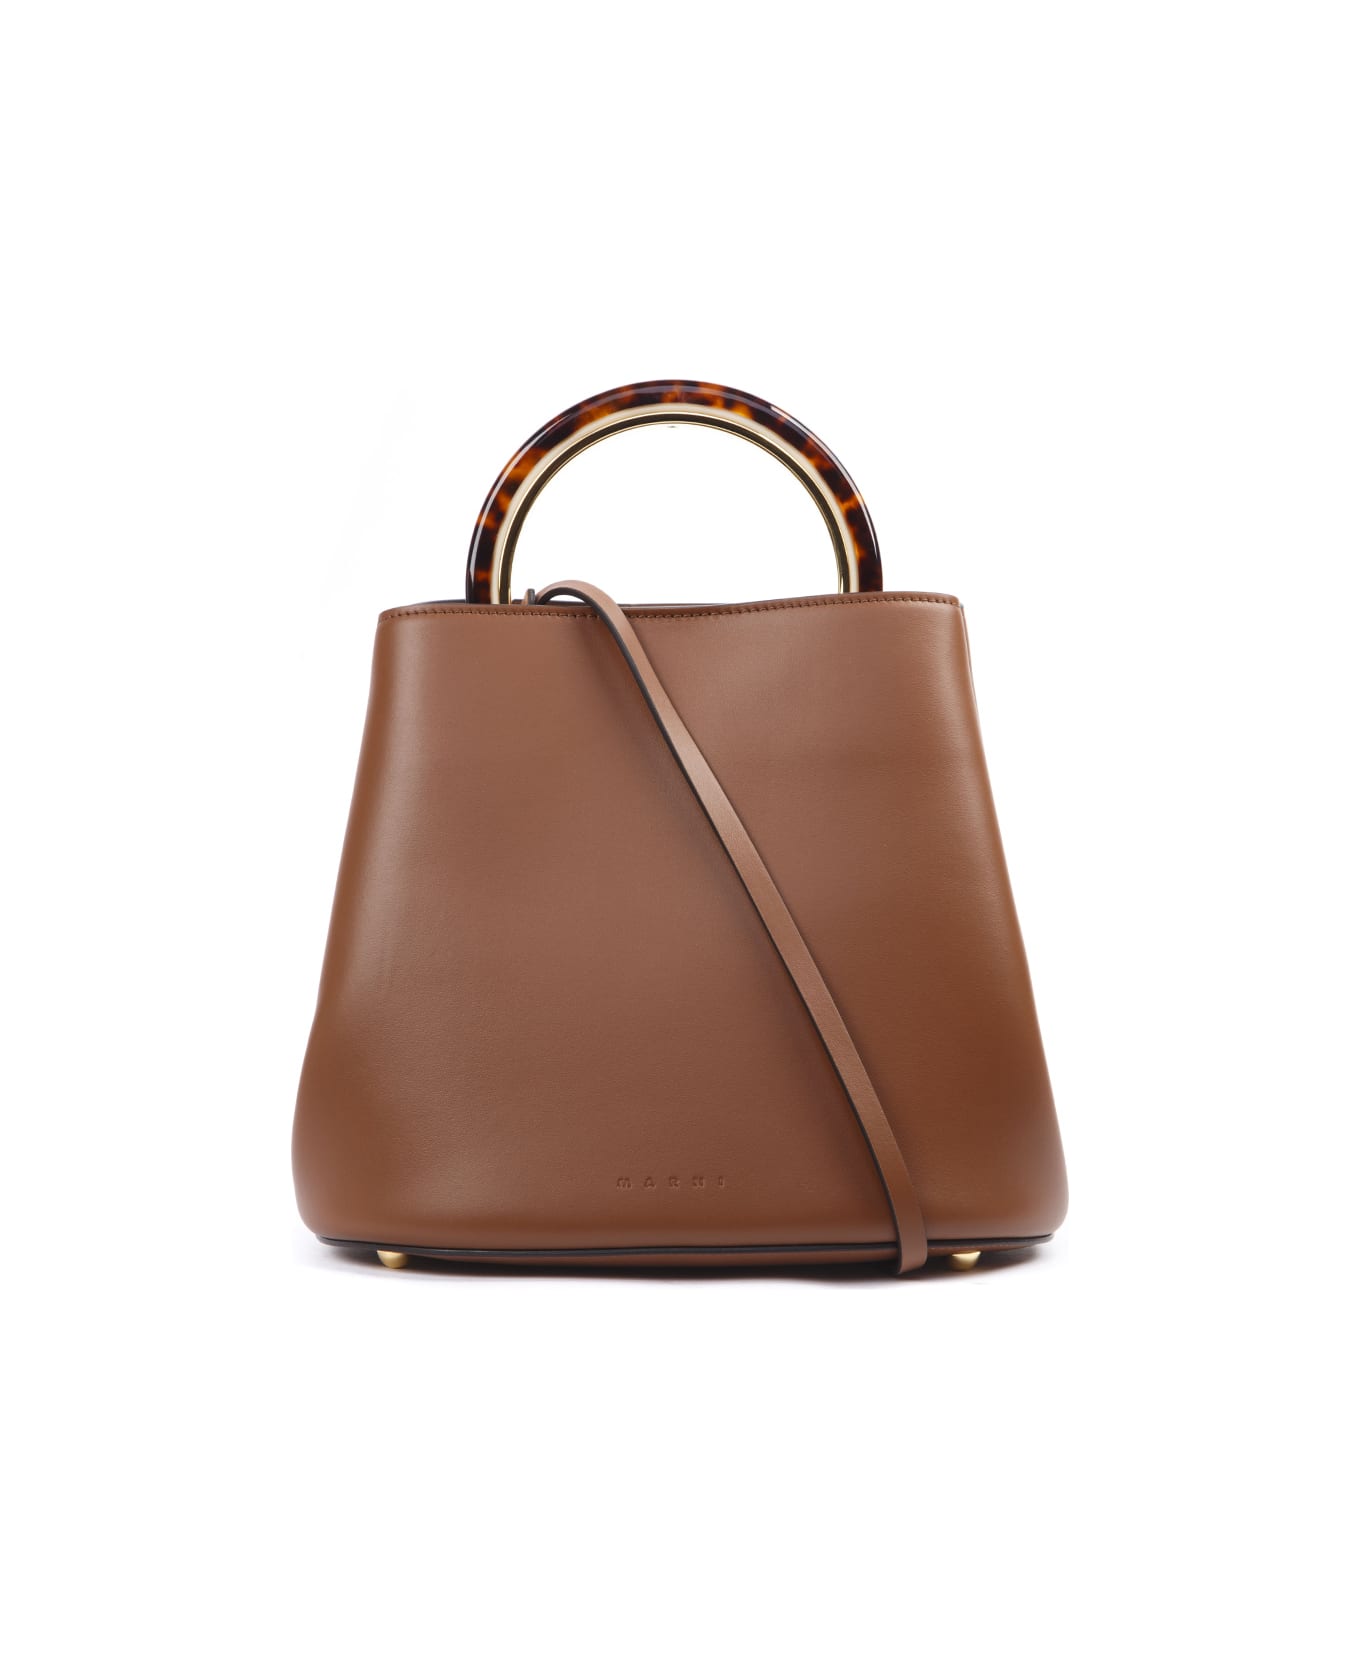 Marni Pannier Bag In Brown Leather | italist